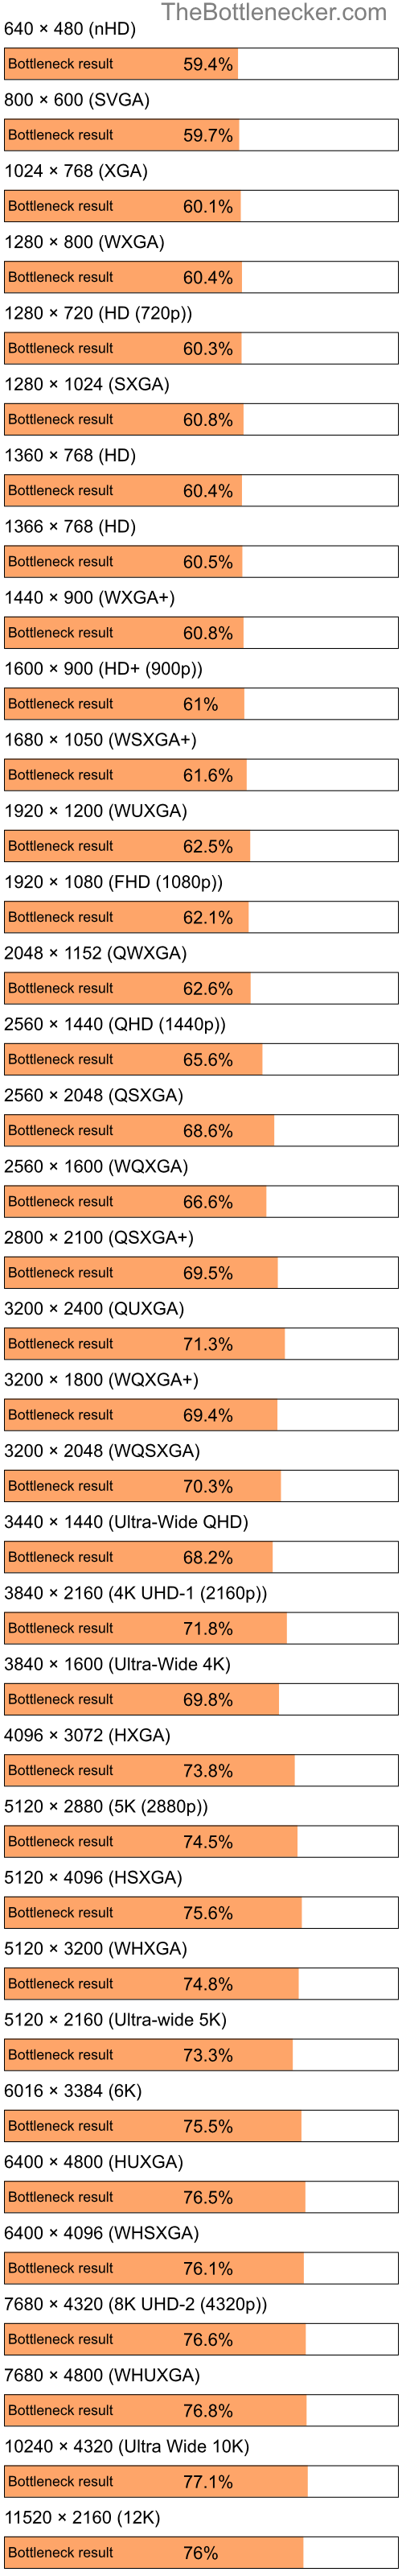 Bottleneck results by resolution for Intel Pentium 4 and NVIDIA GeForce 8300 in7 Days to Die